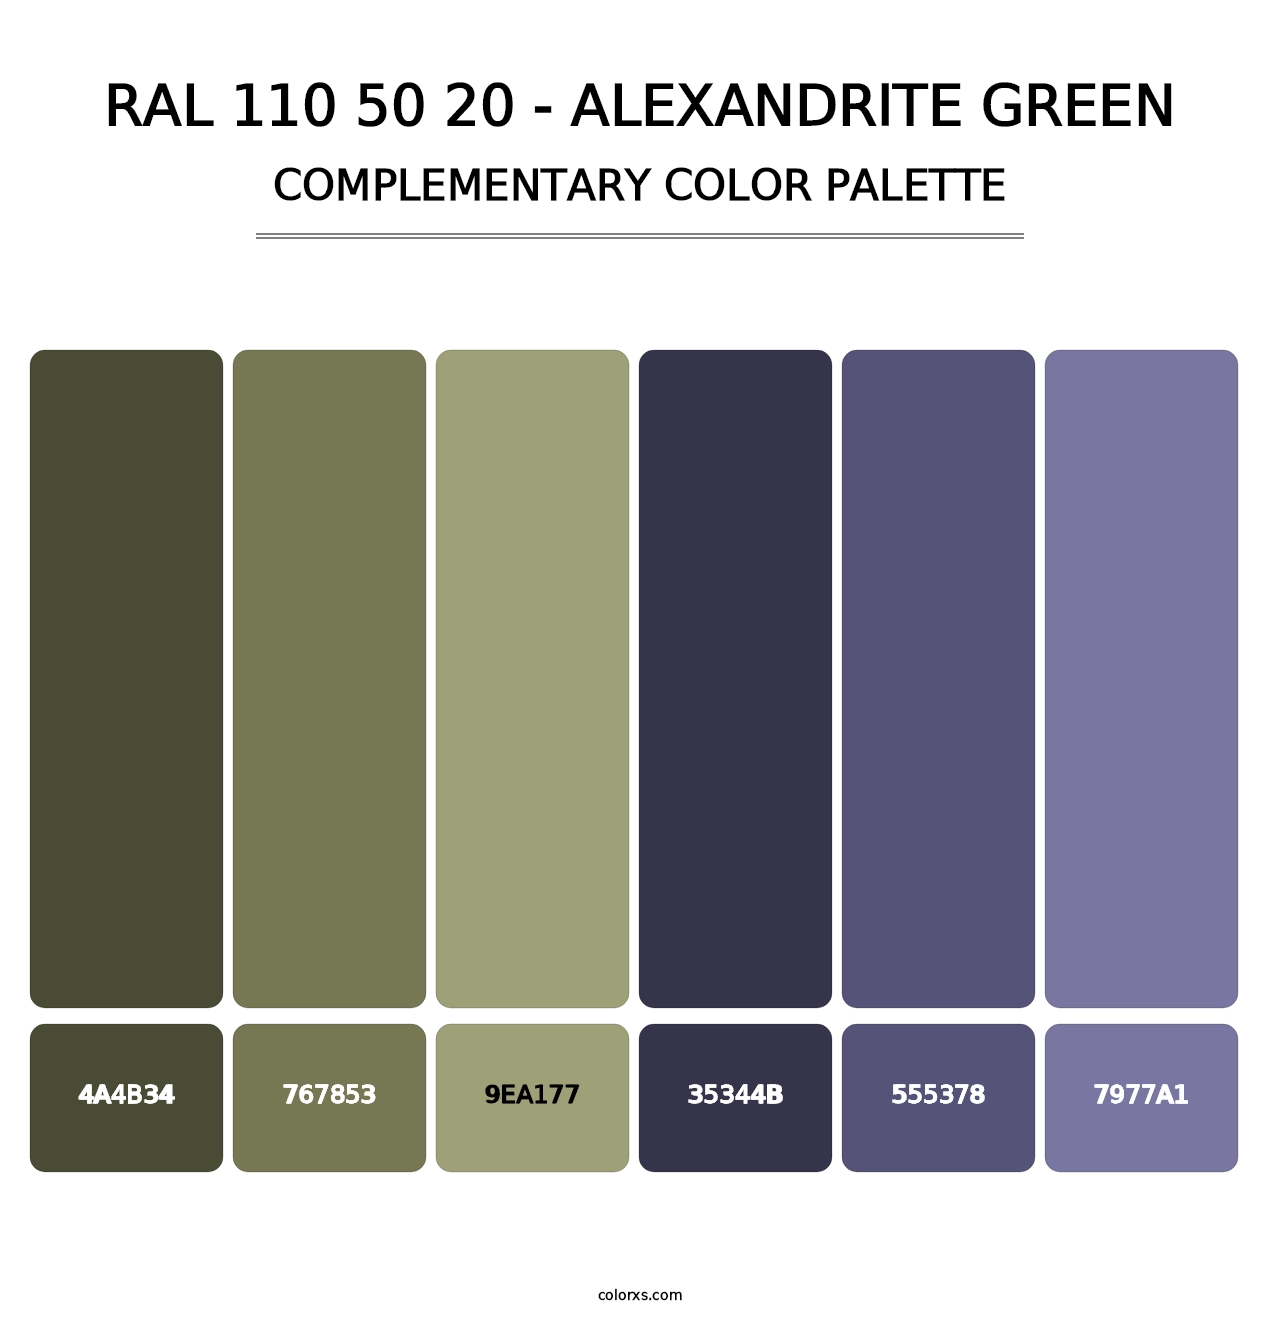 RAL 110 50 20 - Alexandrite Green - Complementary Color Palette